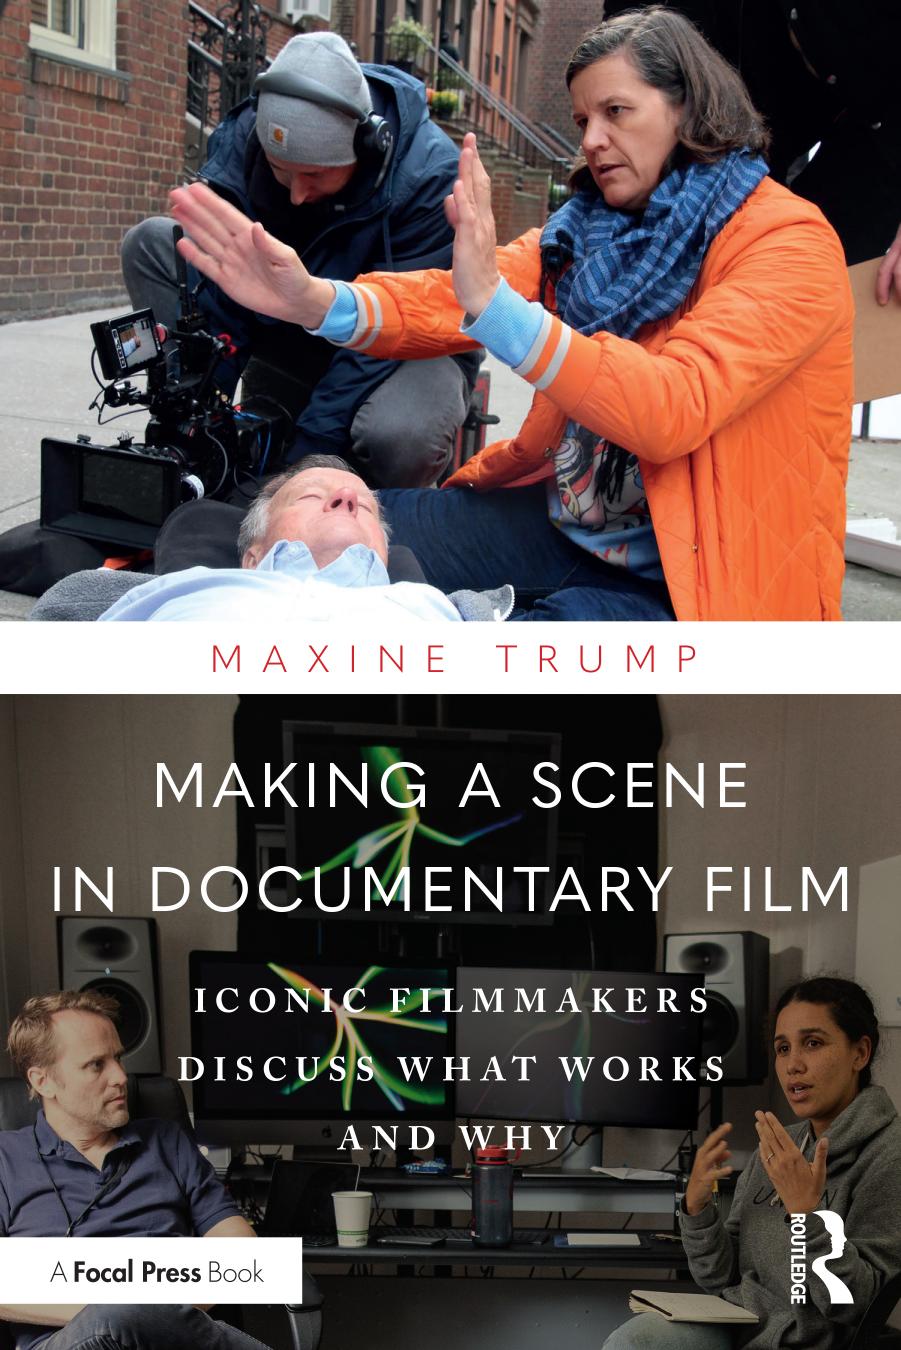 Making a Scene in Documentary Film: Iconic Filmmakers Discuss What Works and Why by Maxine Trump